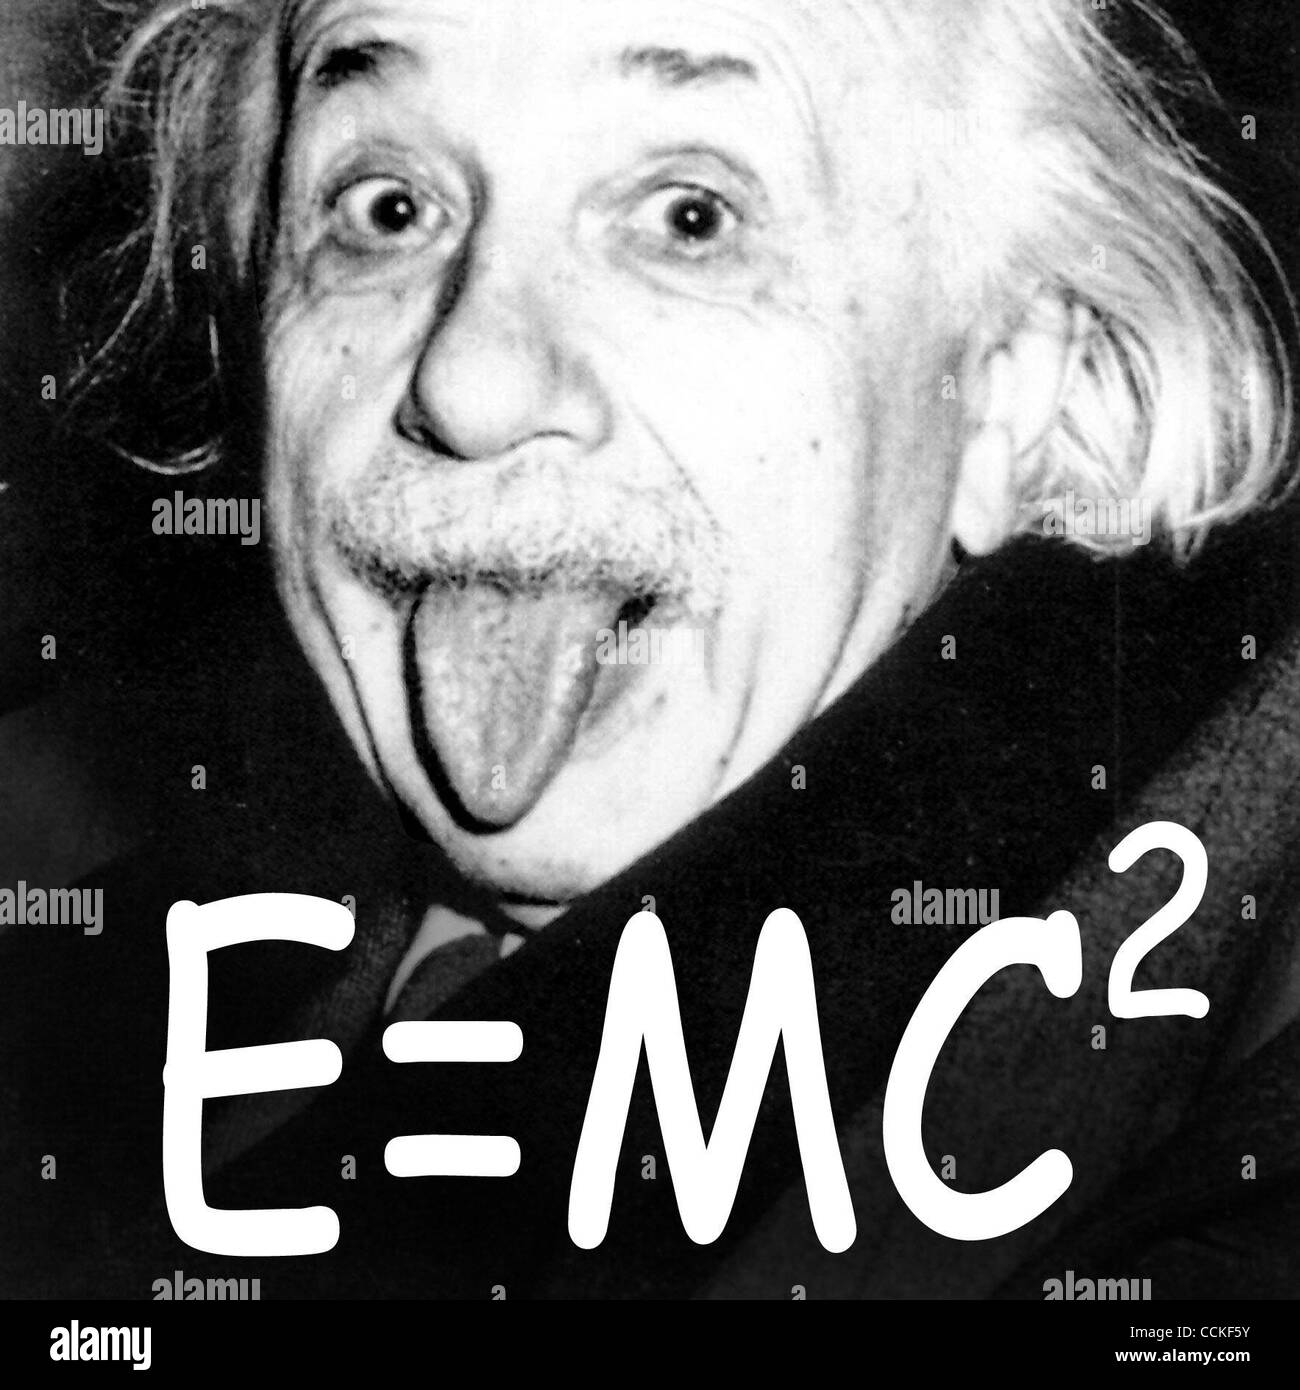 Mar 14, 1951; Princeton, New Jersey, USA; ALBERT EINSTEIN showing his tongue to the photographers on his 72nd birthday. A Jewish, German-born theoretical physicist EINSTEIN who's widely regarded as the most important scientist of the 20th century and one of the greatest physicists of all time, produ Stock Photo